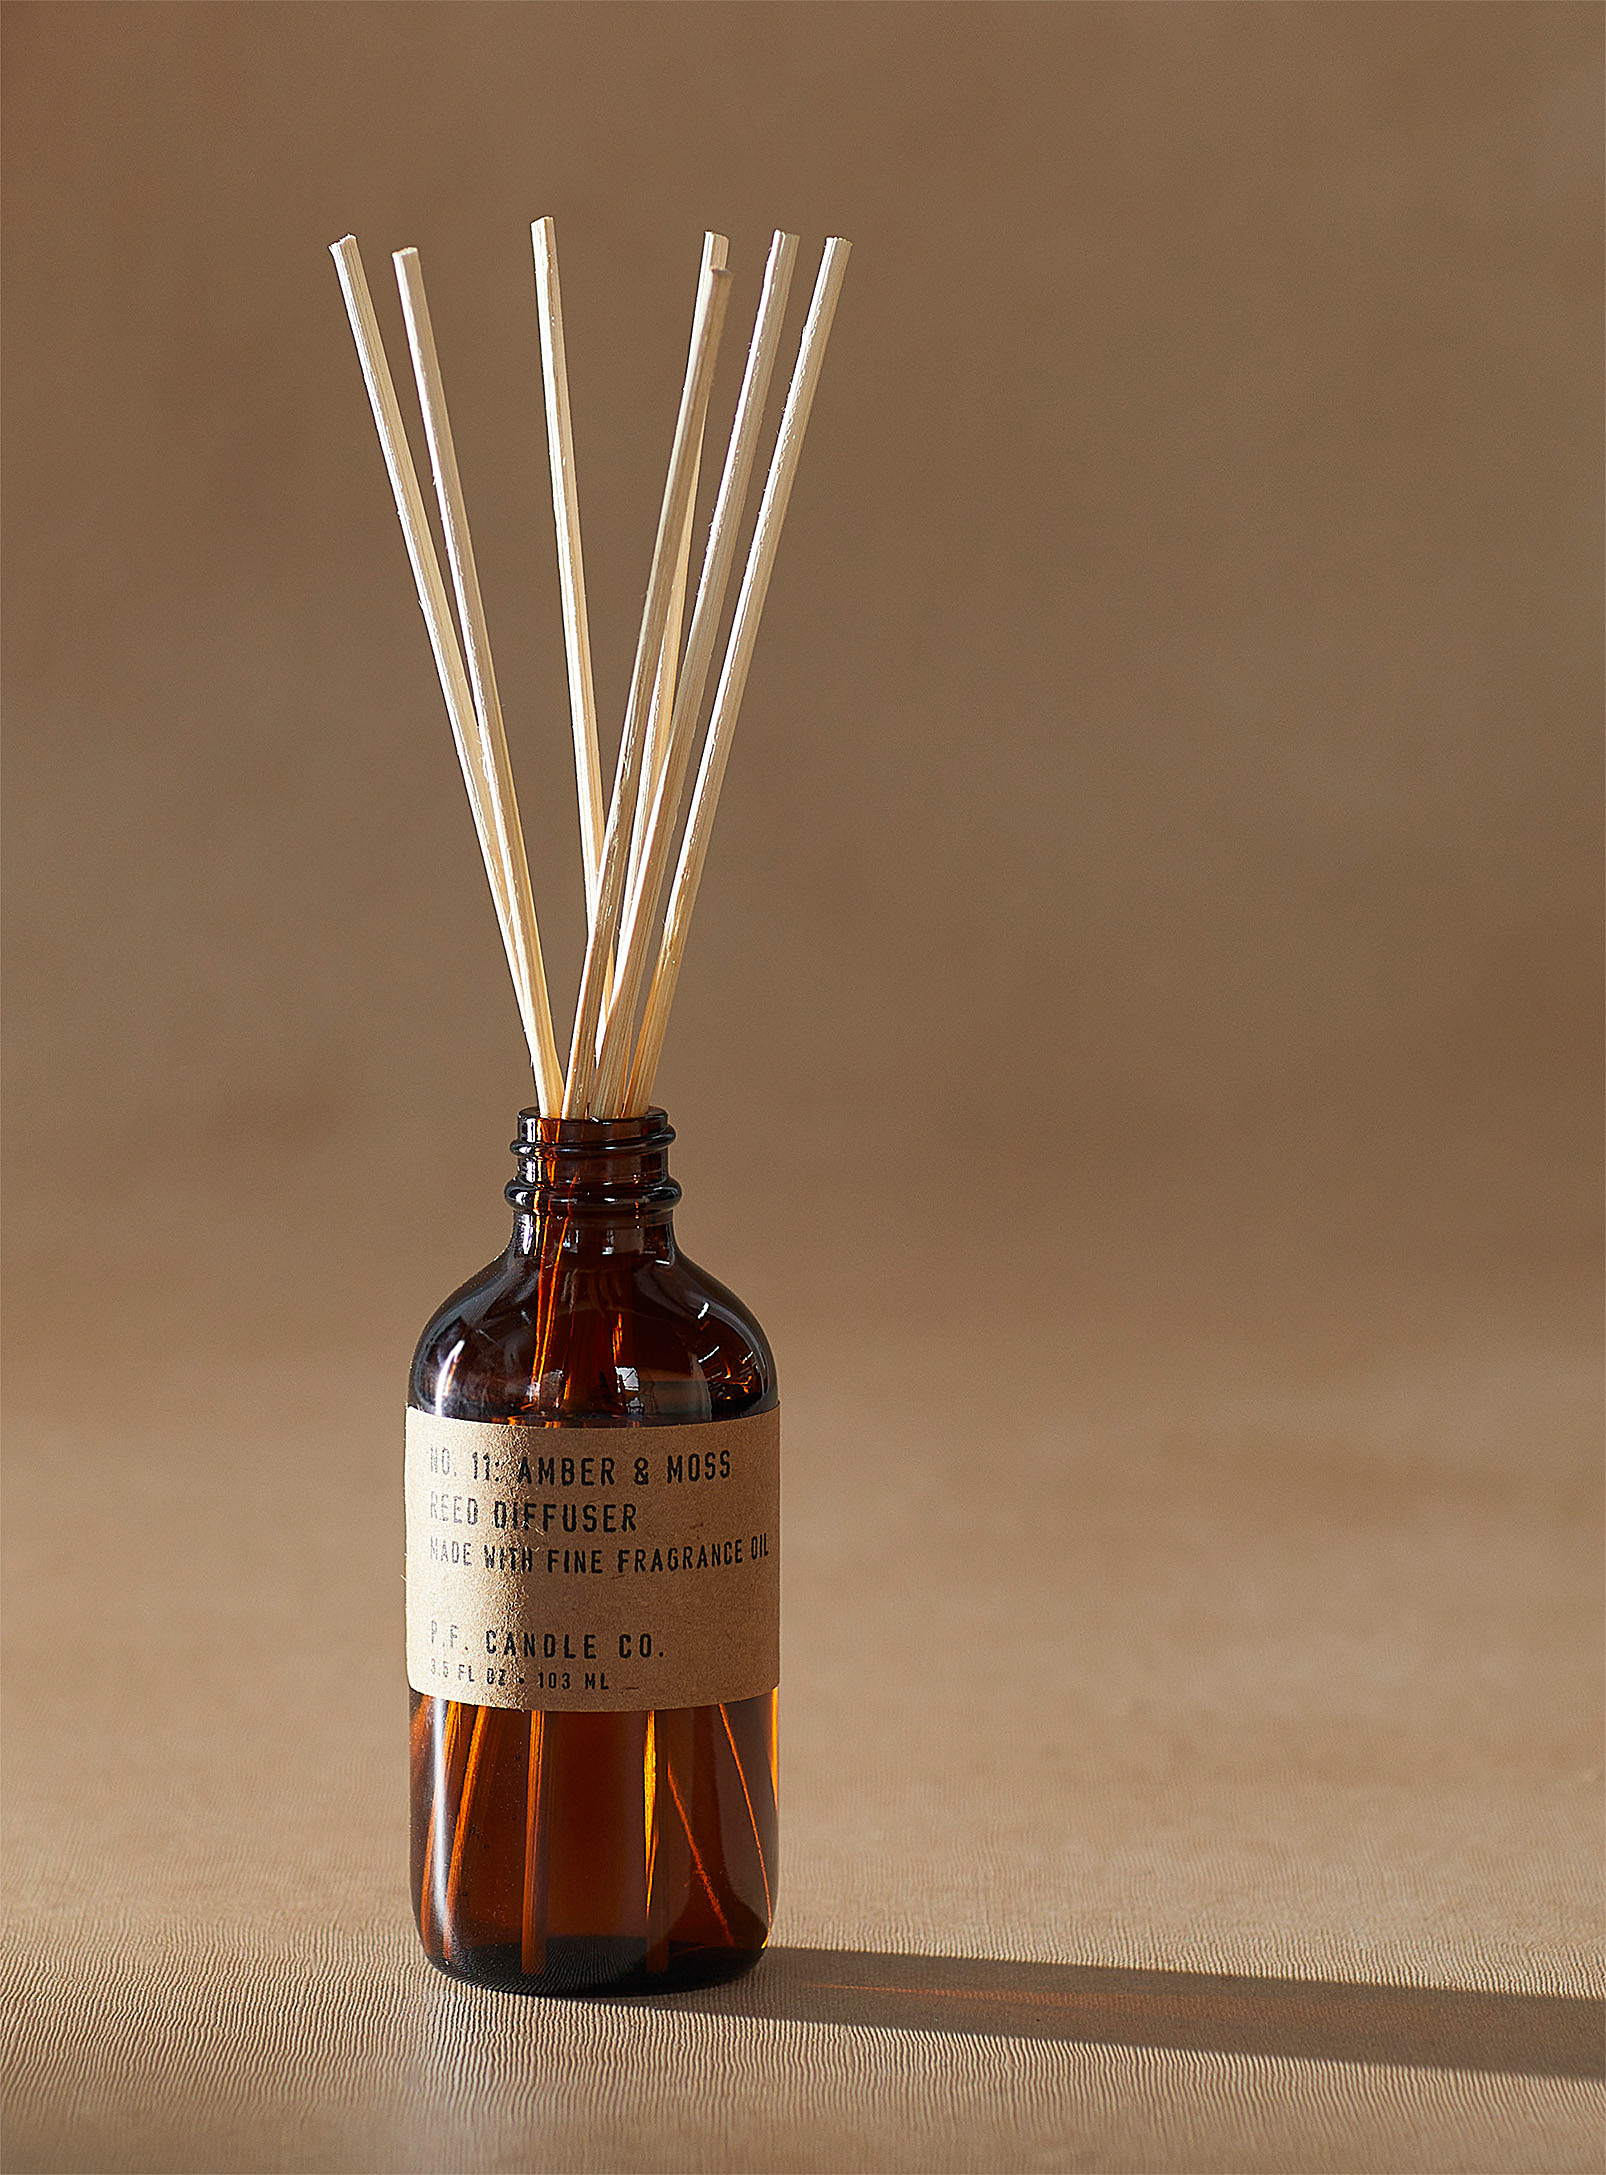 P.f Candle Co. Amber  Moss Diffuser Set In Assorted